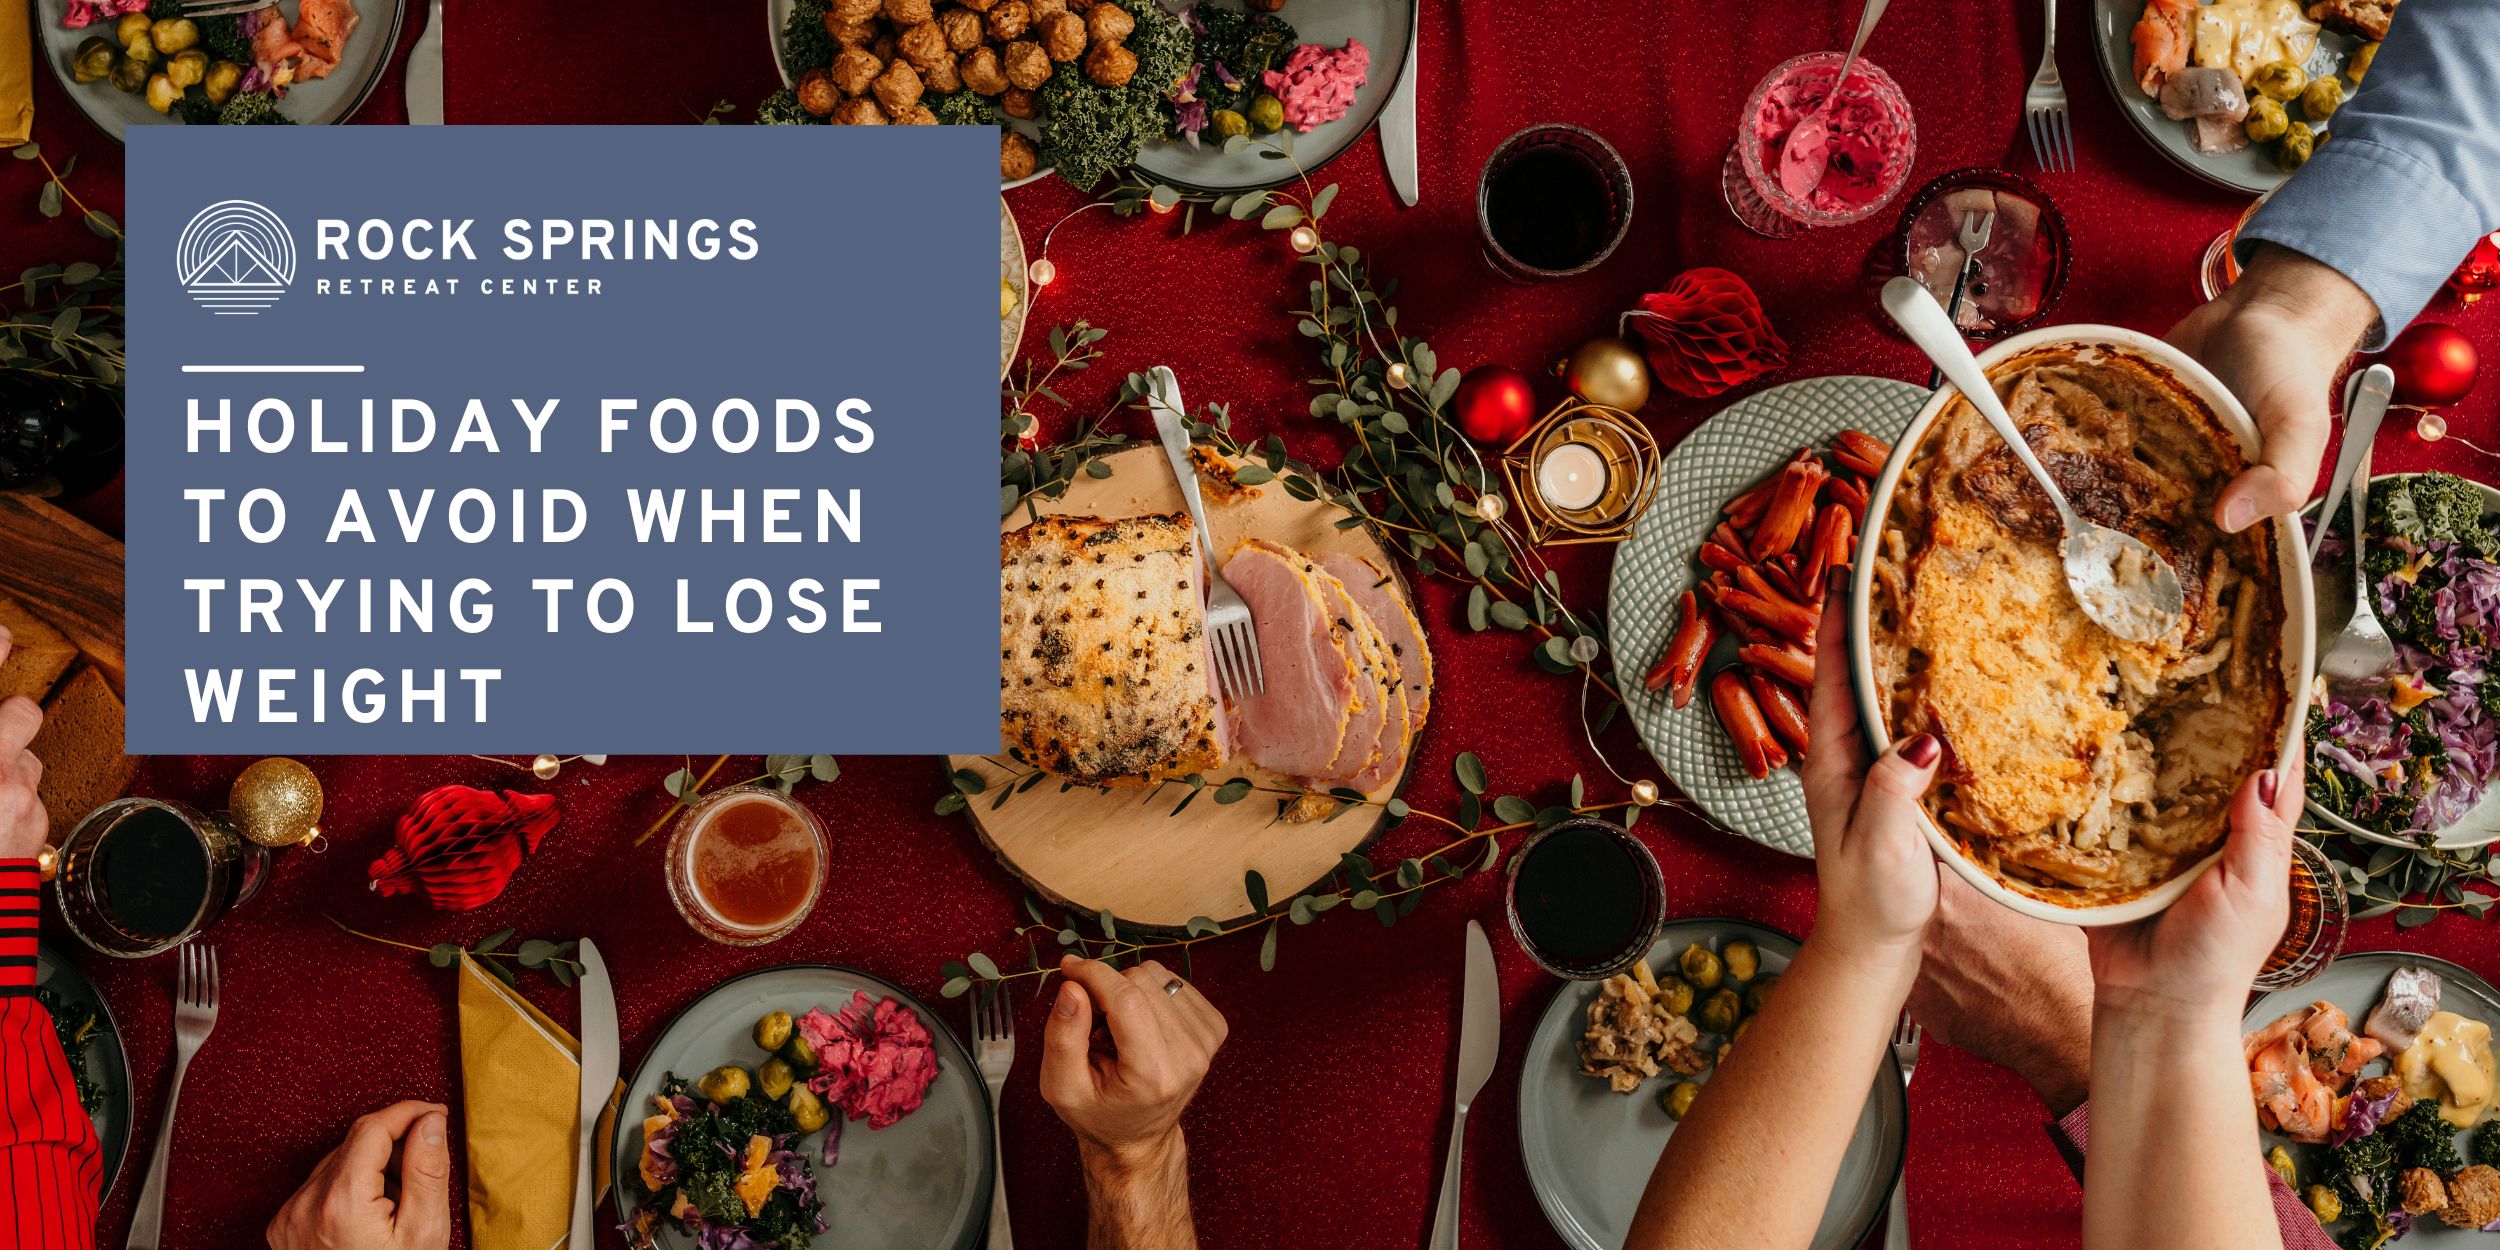 Holiday Foods Avoid Trying Lose Weight